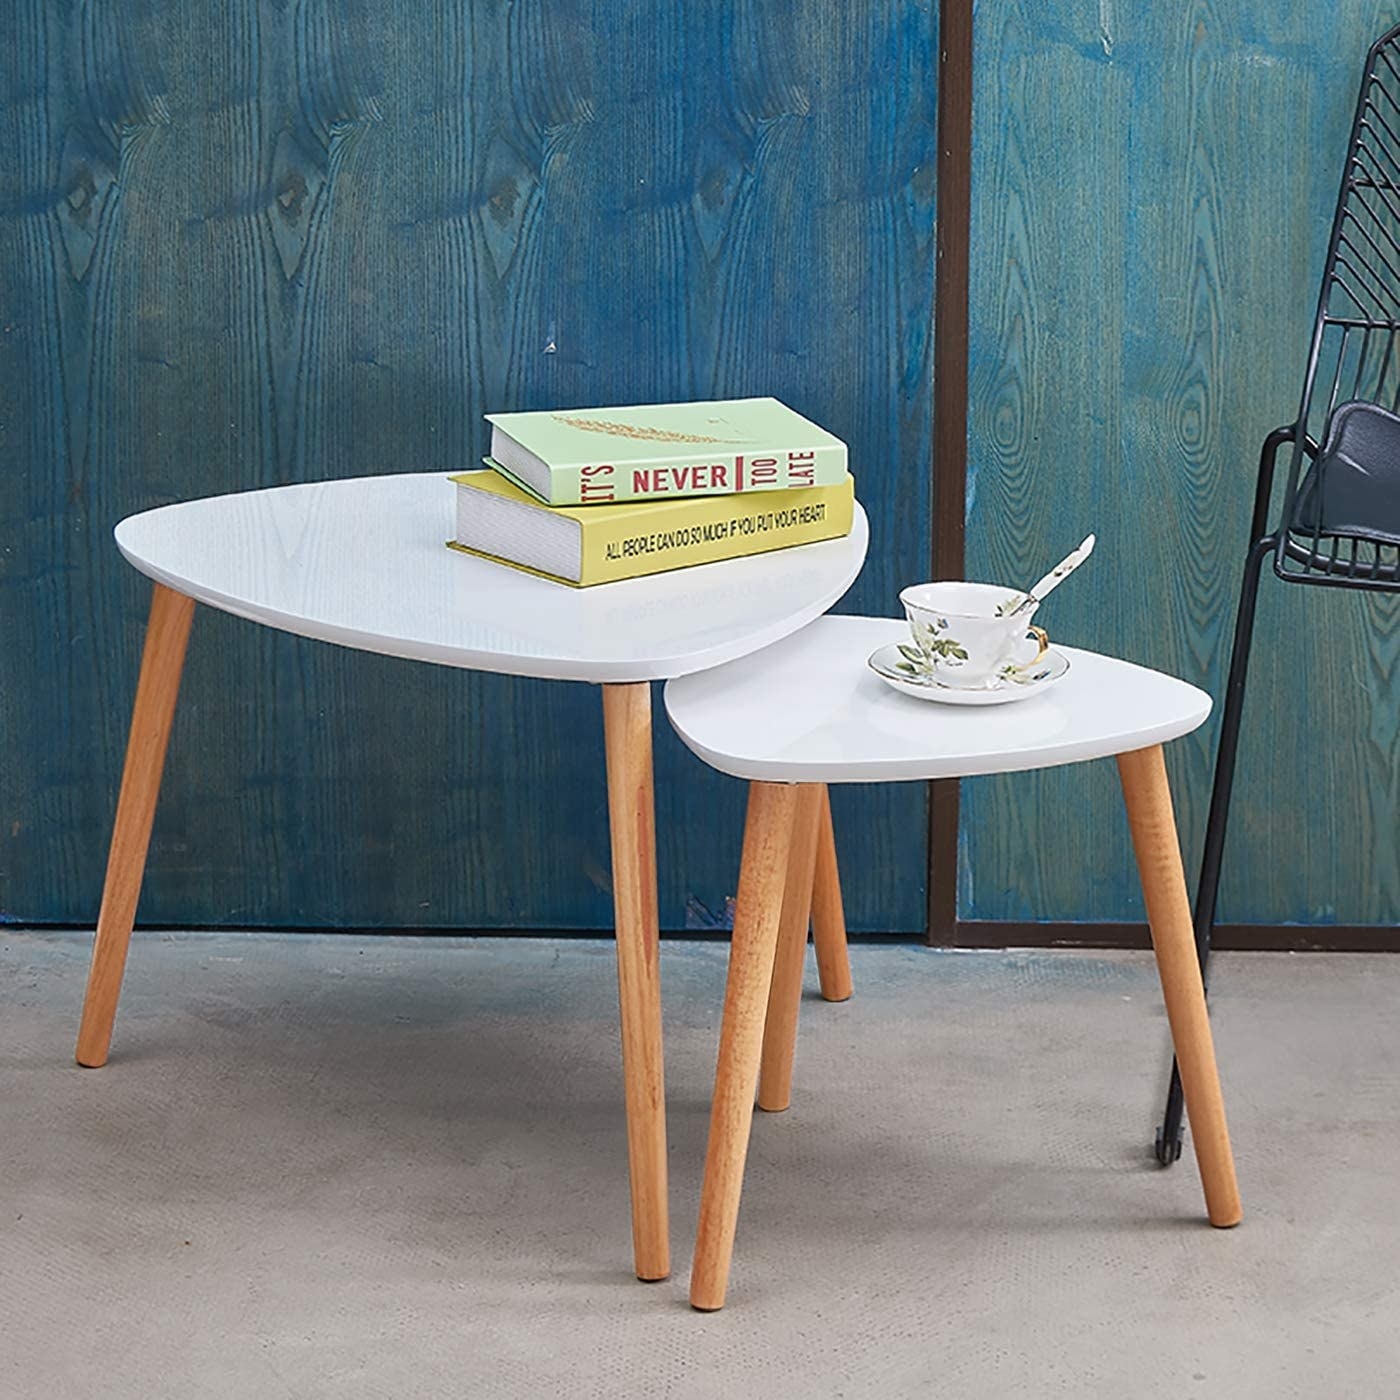 The two side tables in medium and small sizes with wooden legs and white surfaces